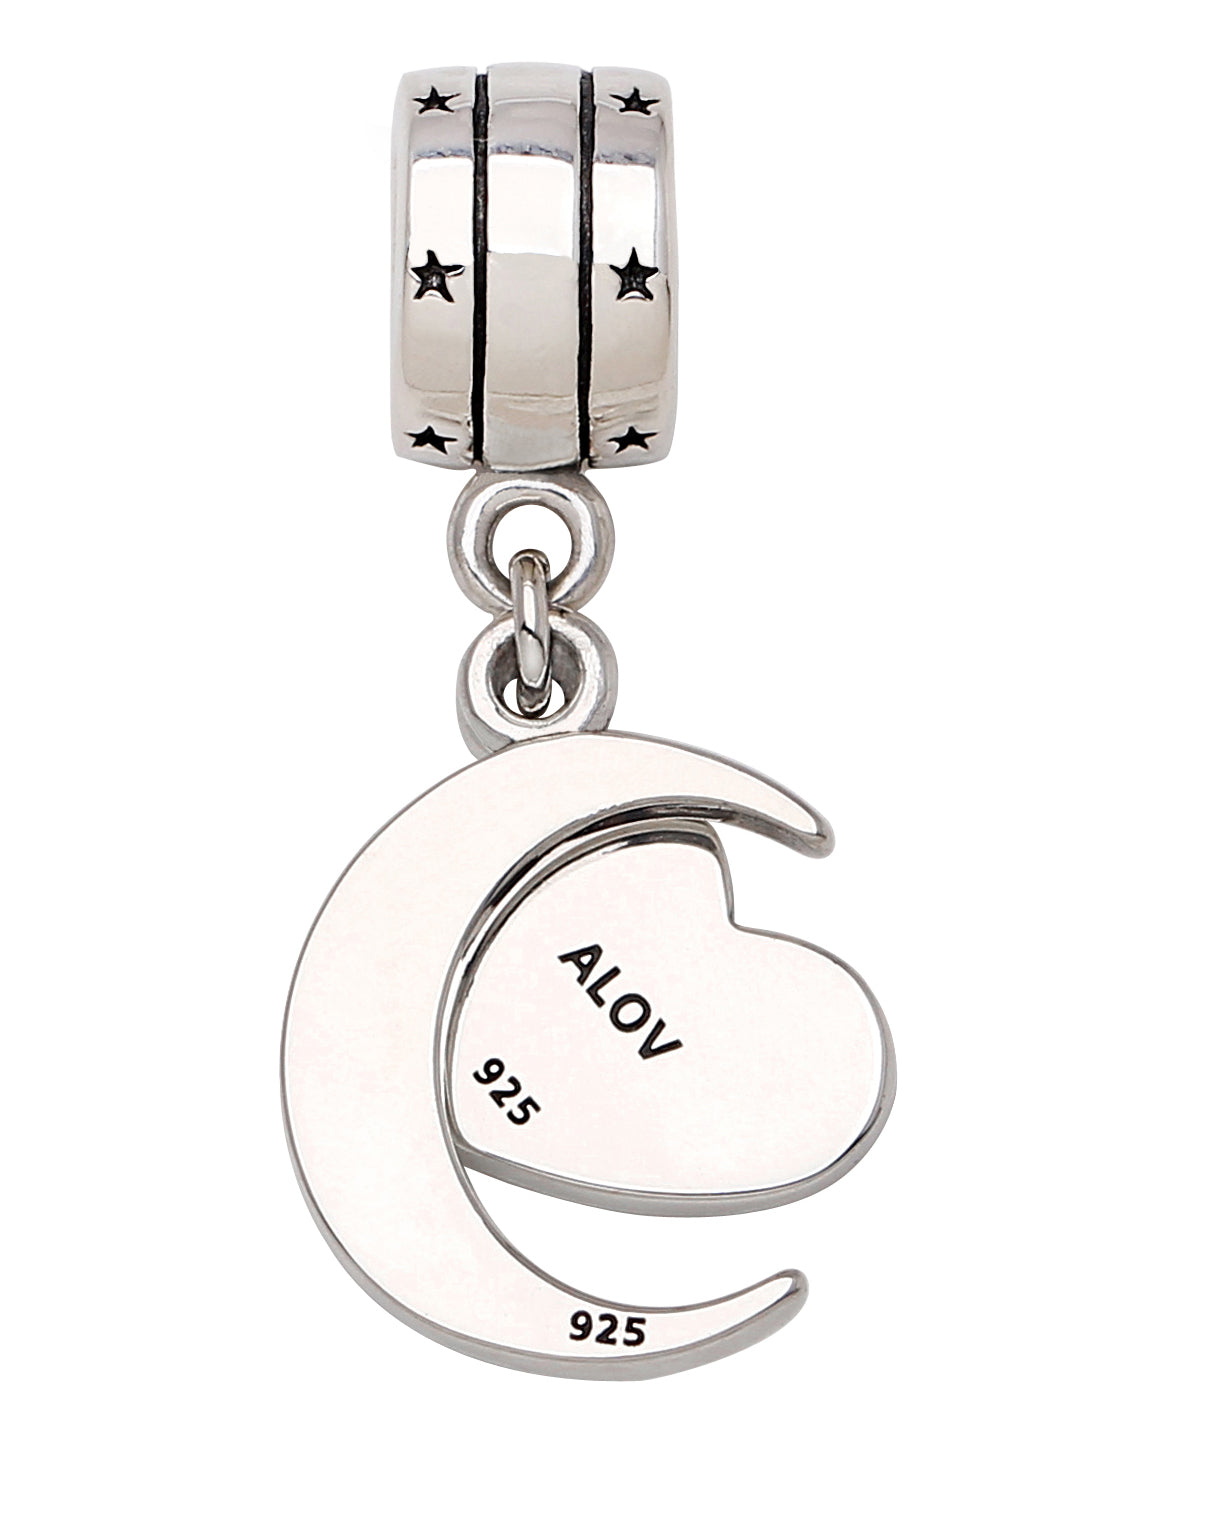 "I Love You To The Moon and Back" Two-Piece Pendant Bead Charm ALOV Sterling Silver